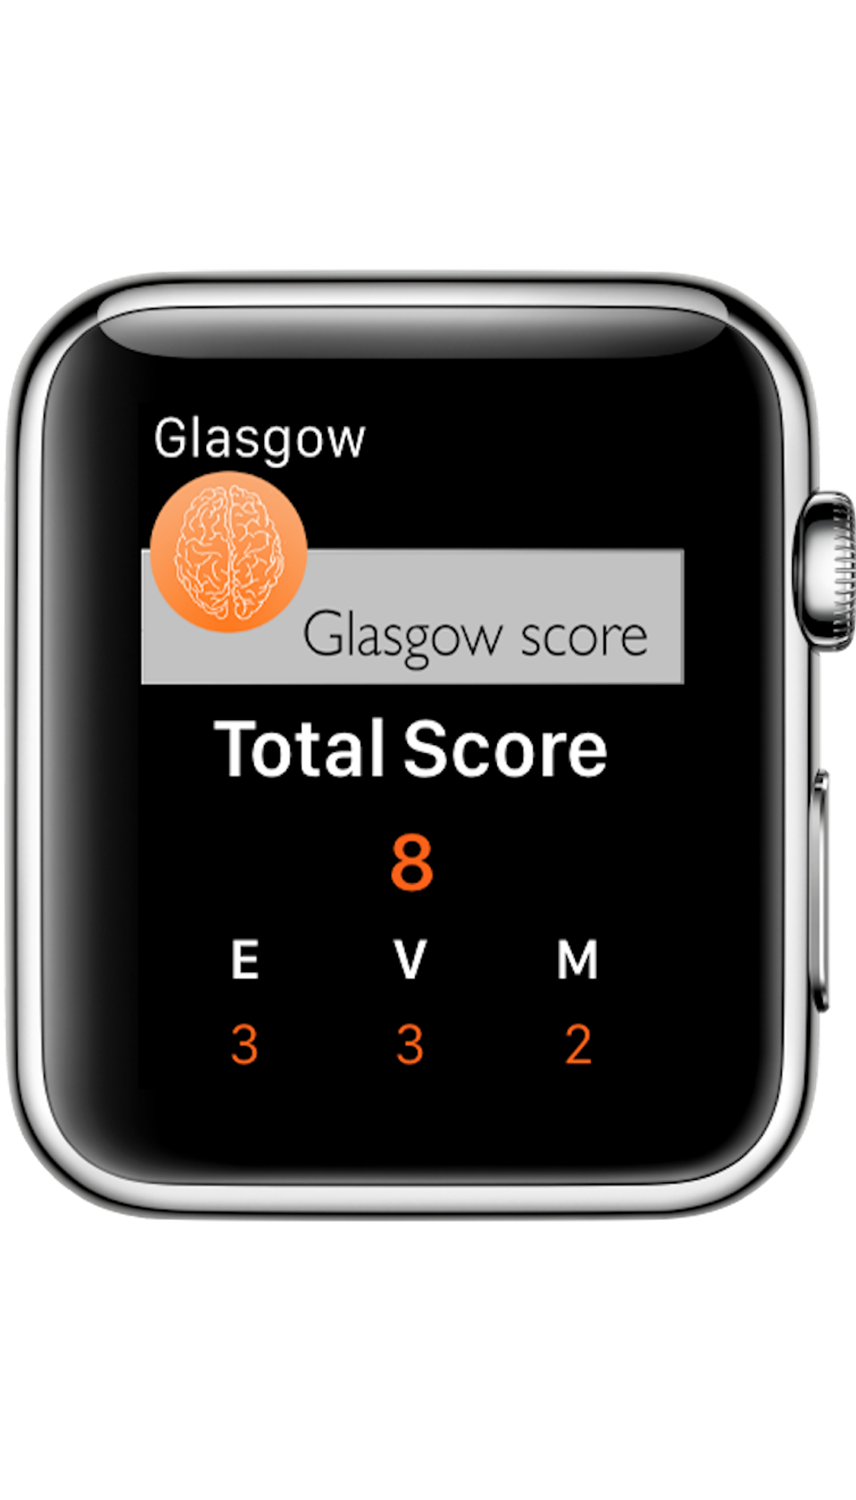 ...And also on Apple Watch!